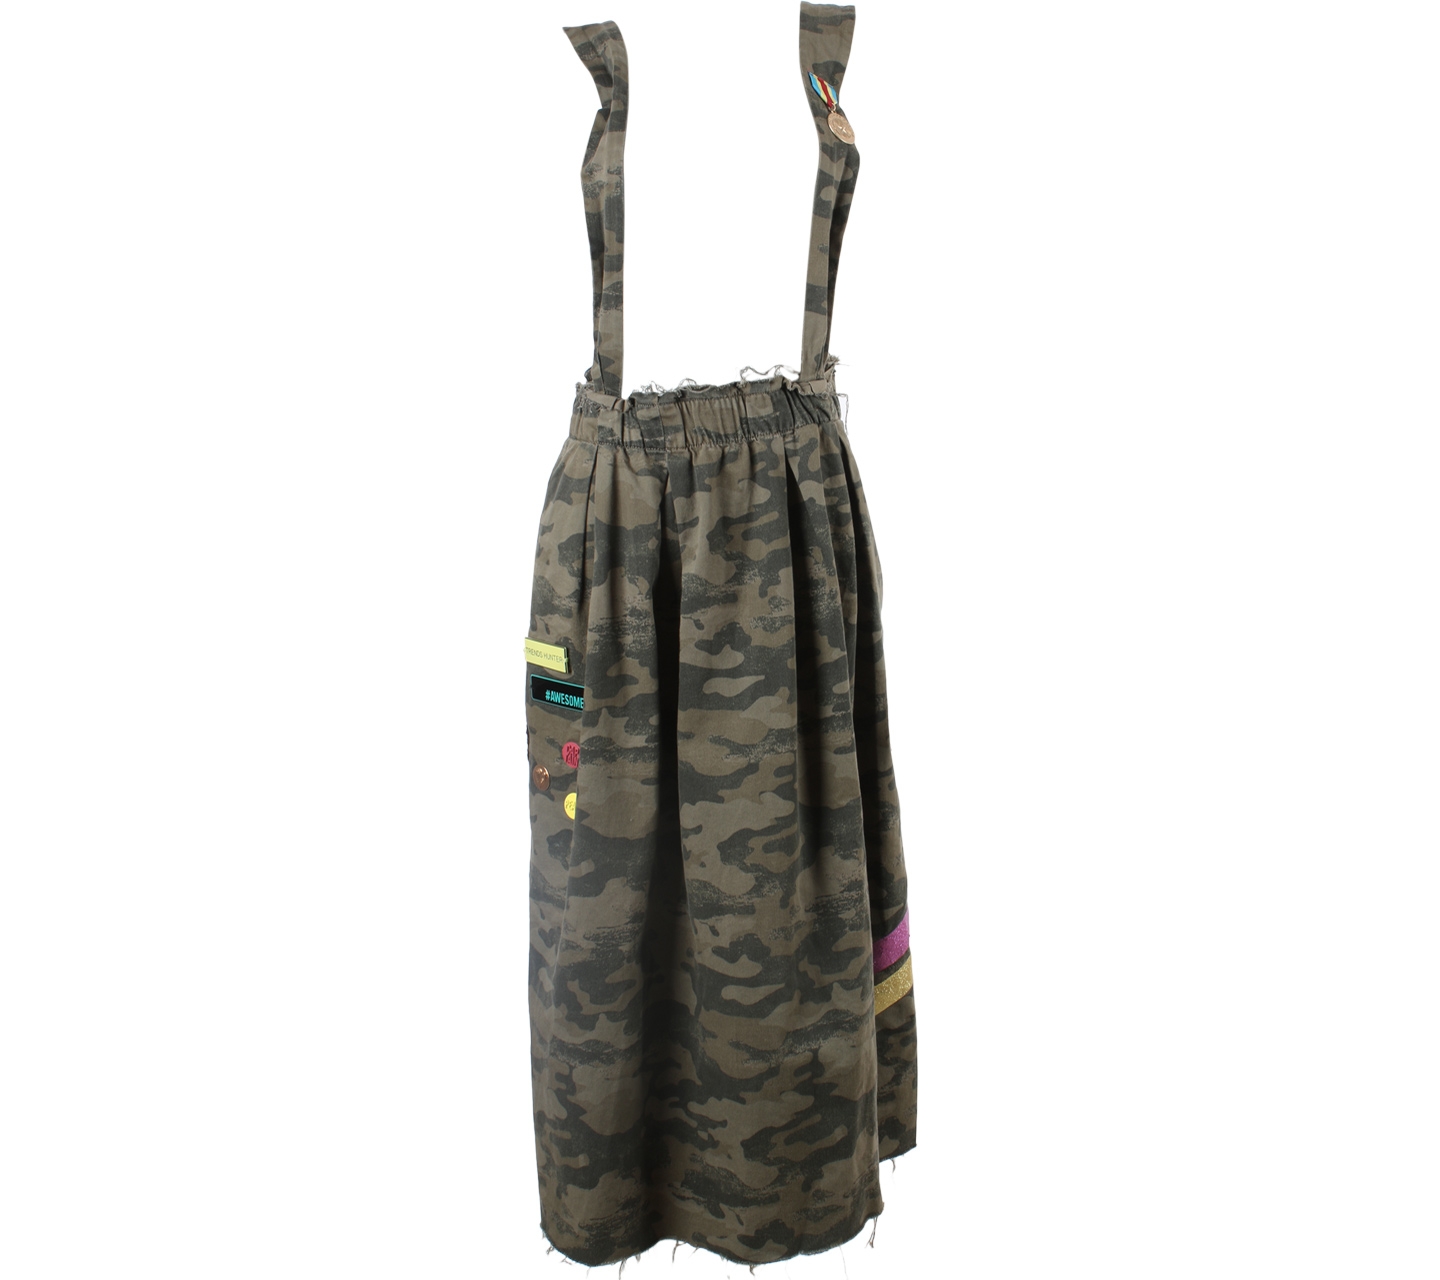 Zara Green Army patched Skirt